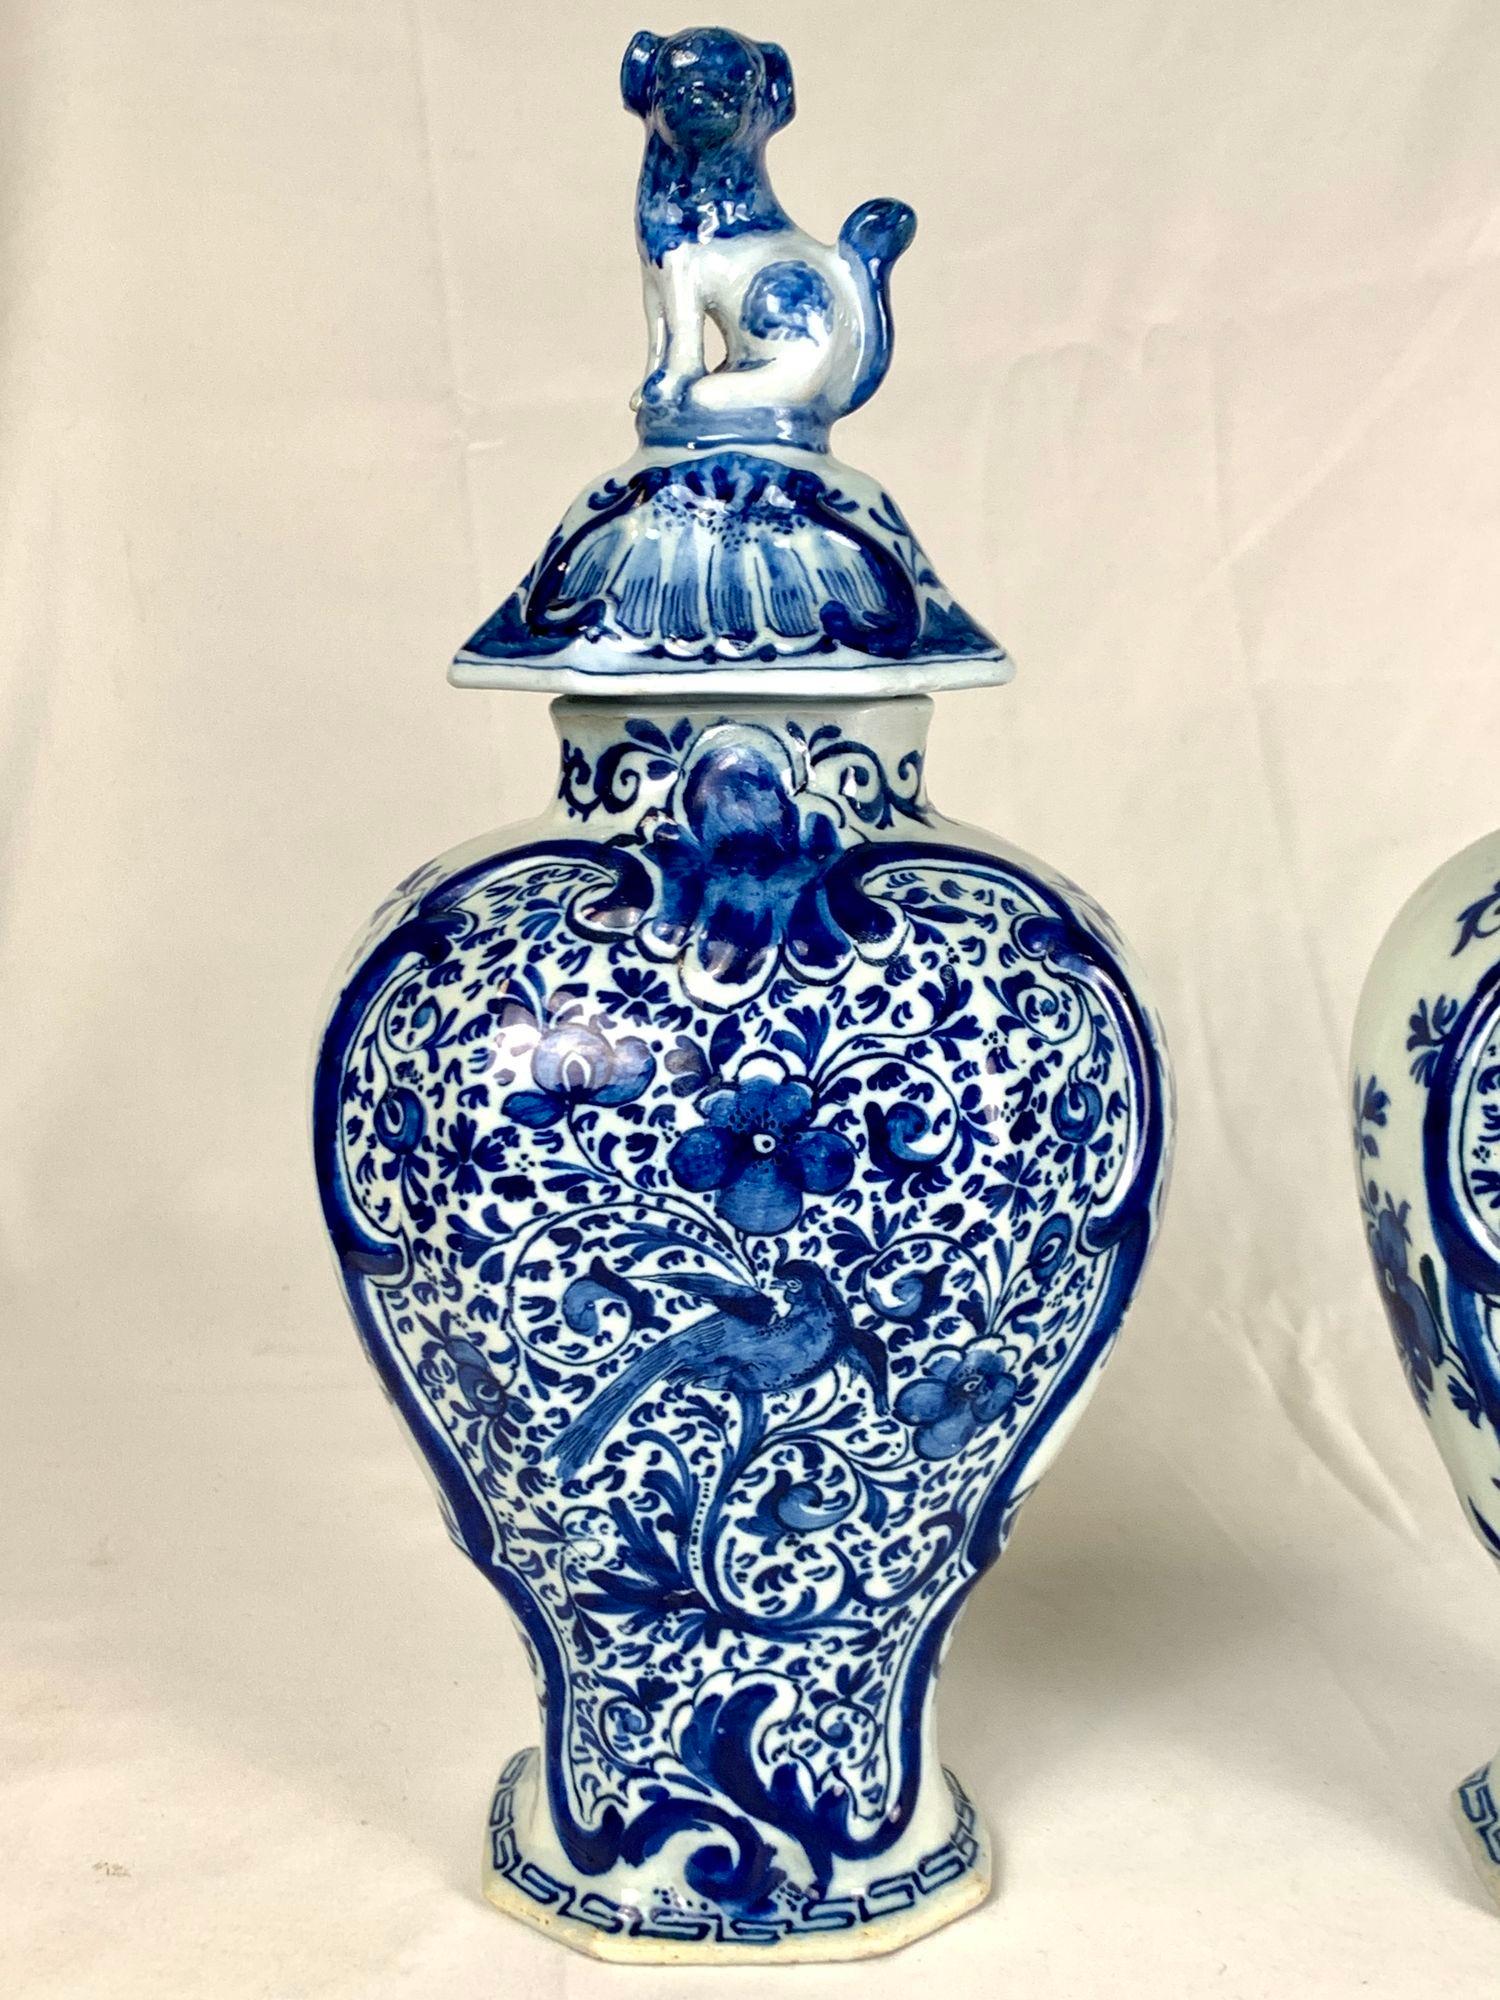 This gorgeous pair of blue and white Dutch Delft mantle jars was hand-painted at 